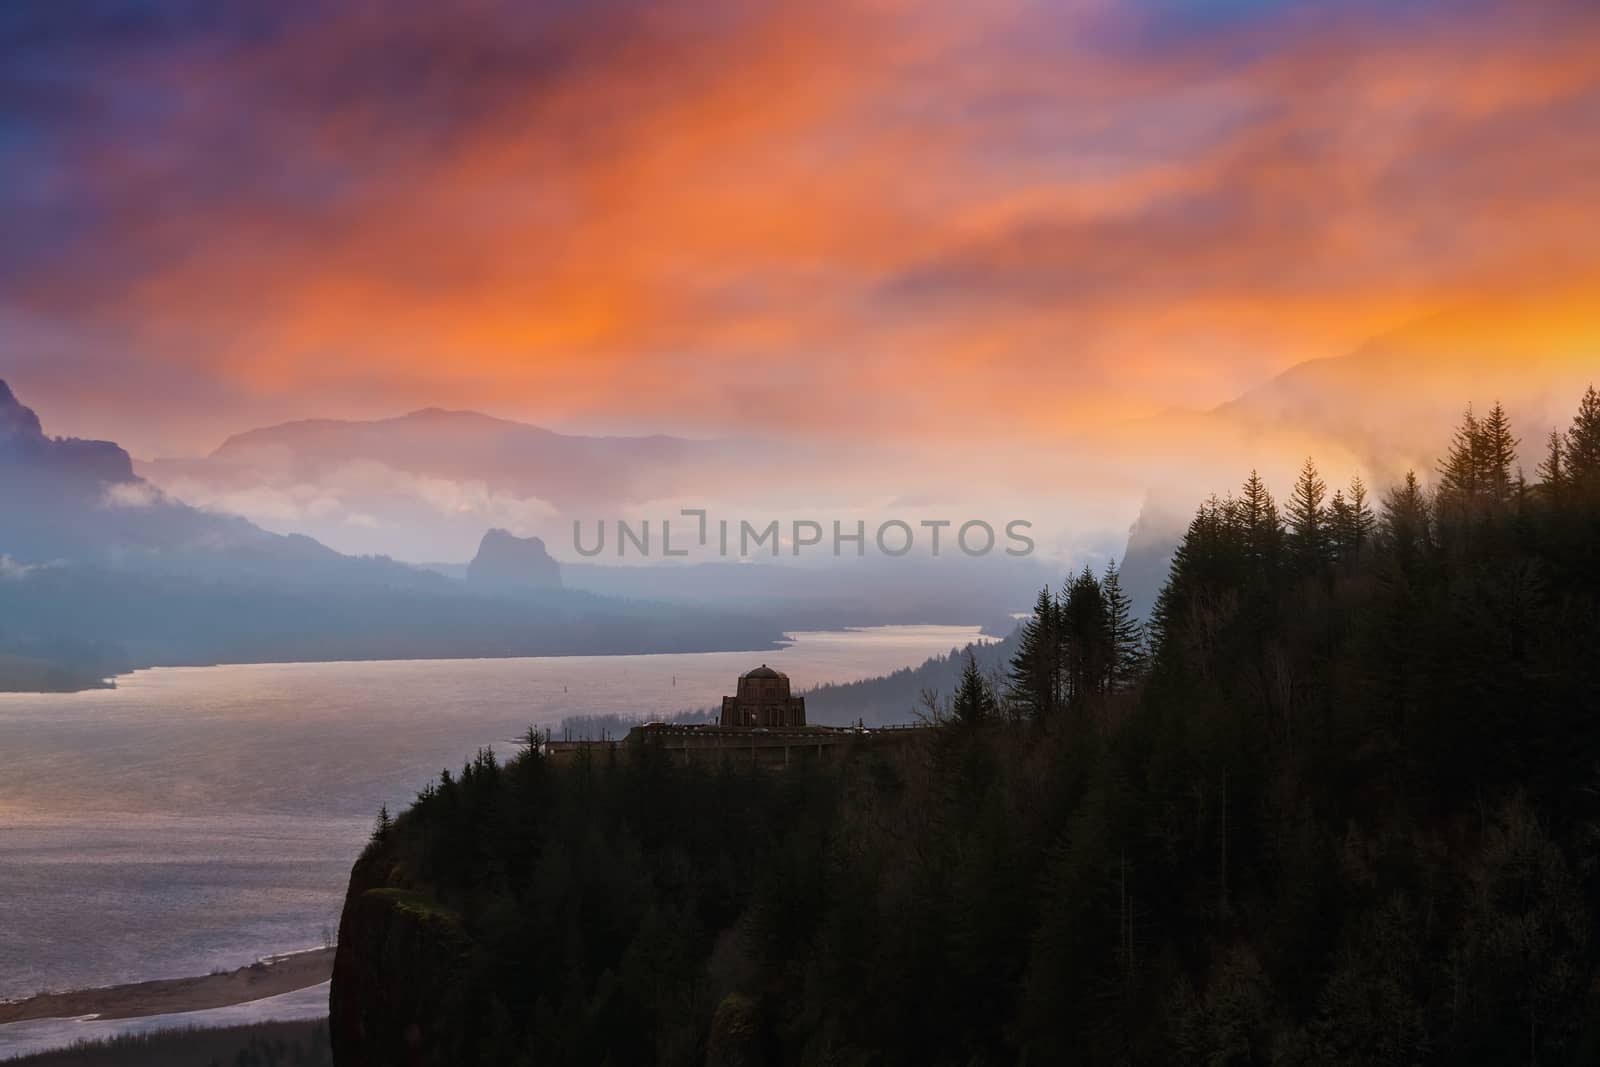 Vista House on Crown Point along Columbia River Gorge during sunrise